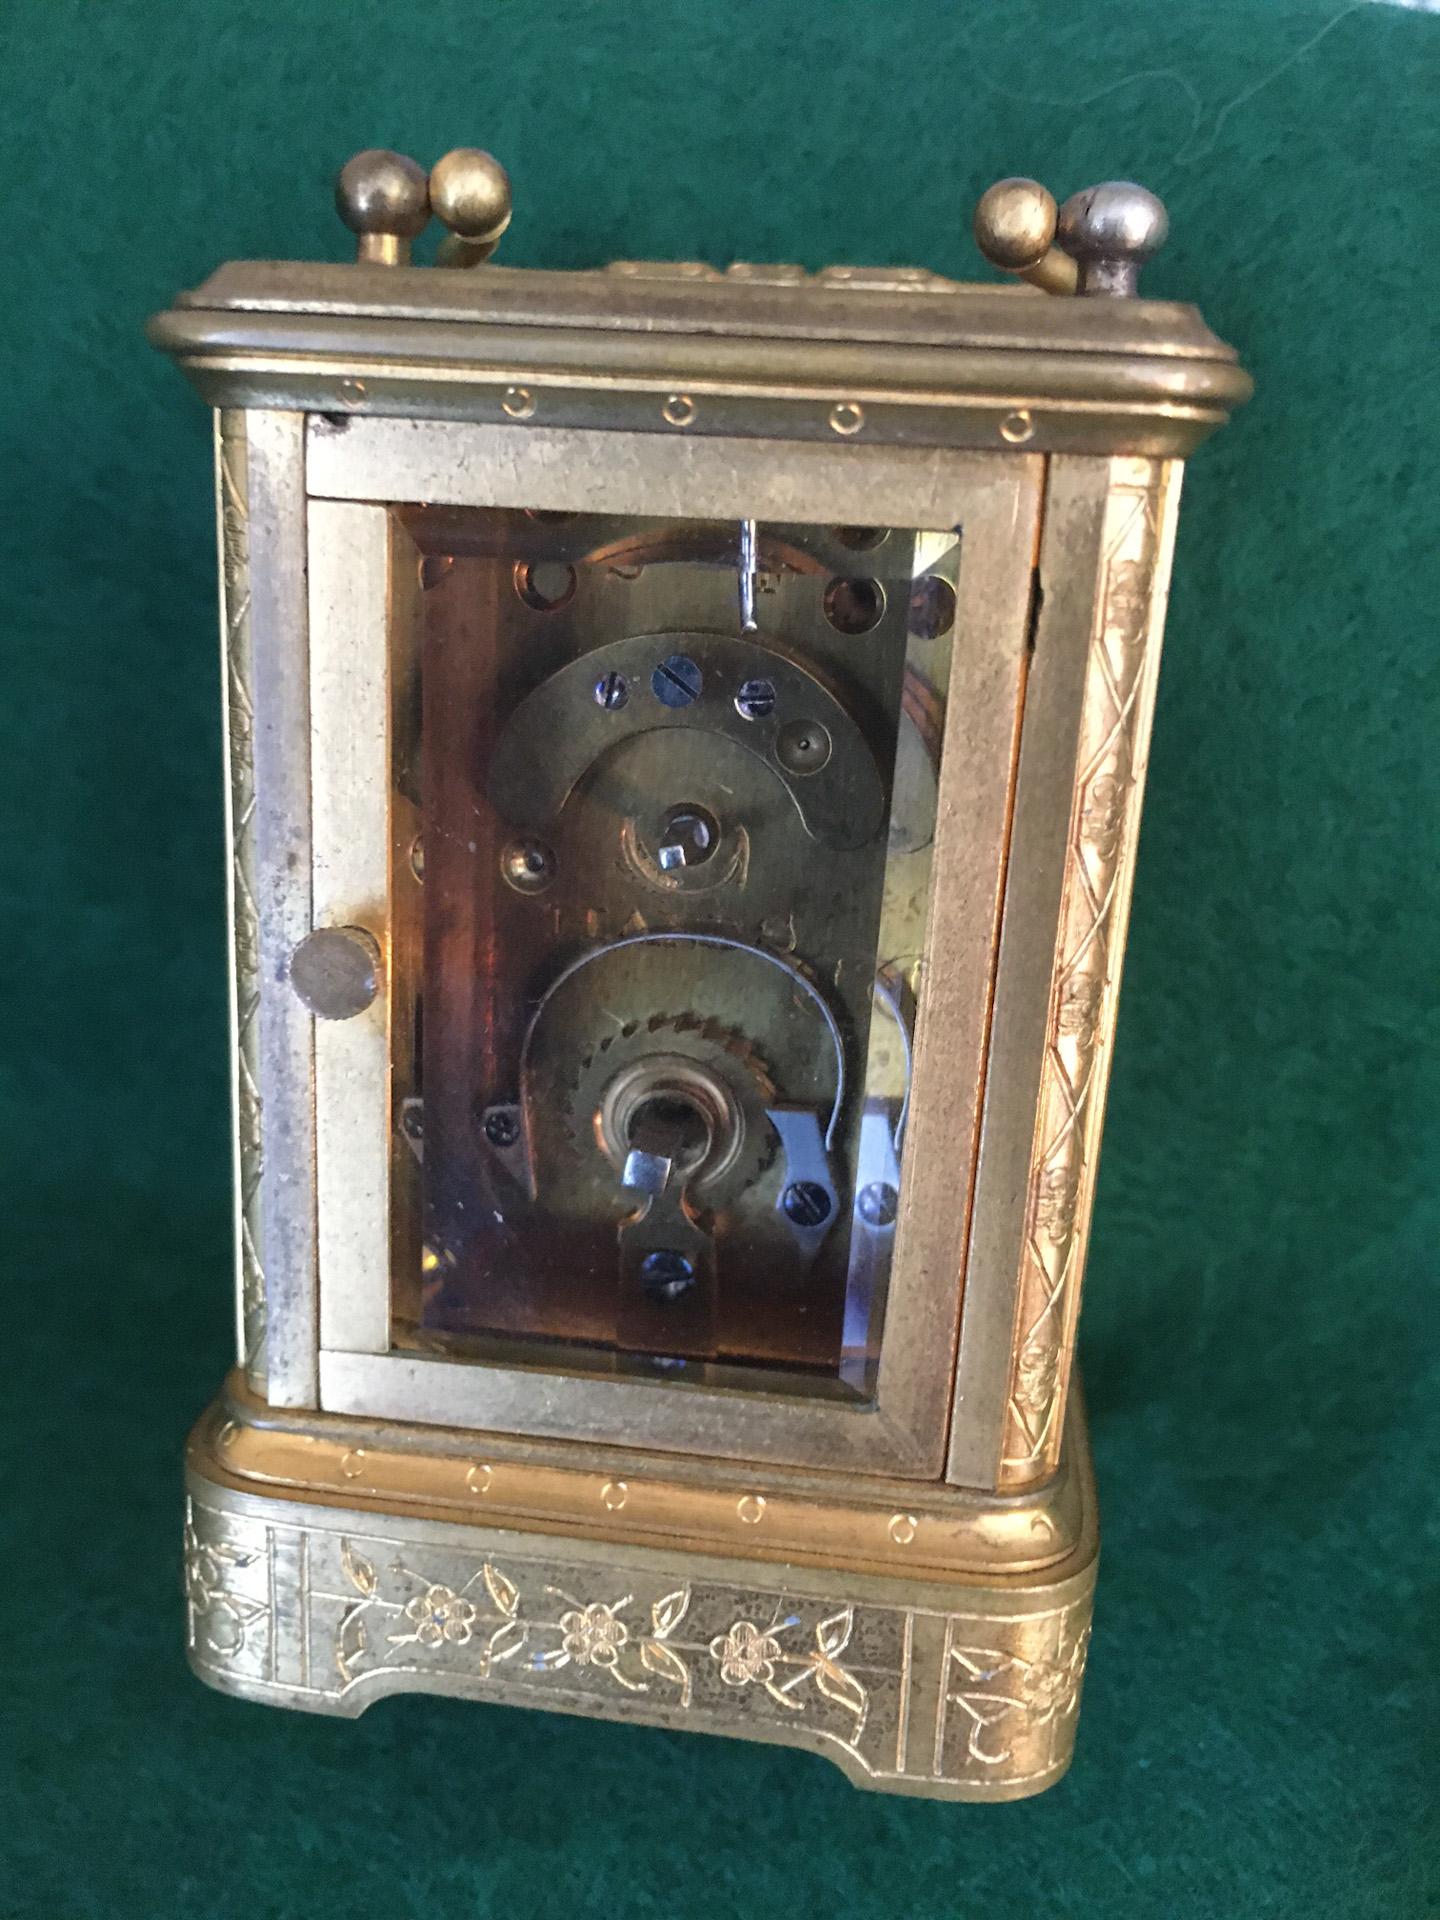 This lovely little jewel of a carriage clock features a profusely floriate engraved gilded Mignonnette No.1 Corniche case with rectangular top. The folding handle is over the oval beveled glass escapement which is
engraved with monogram. The four